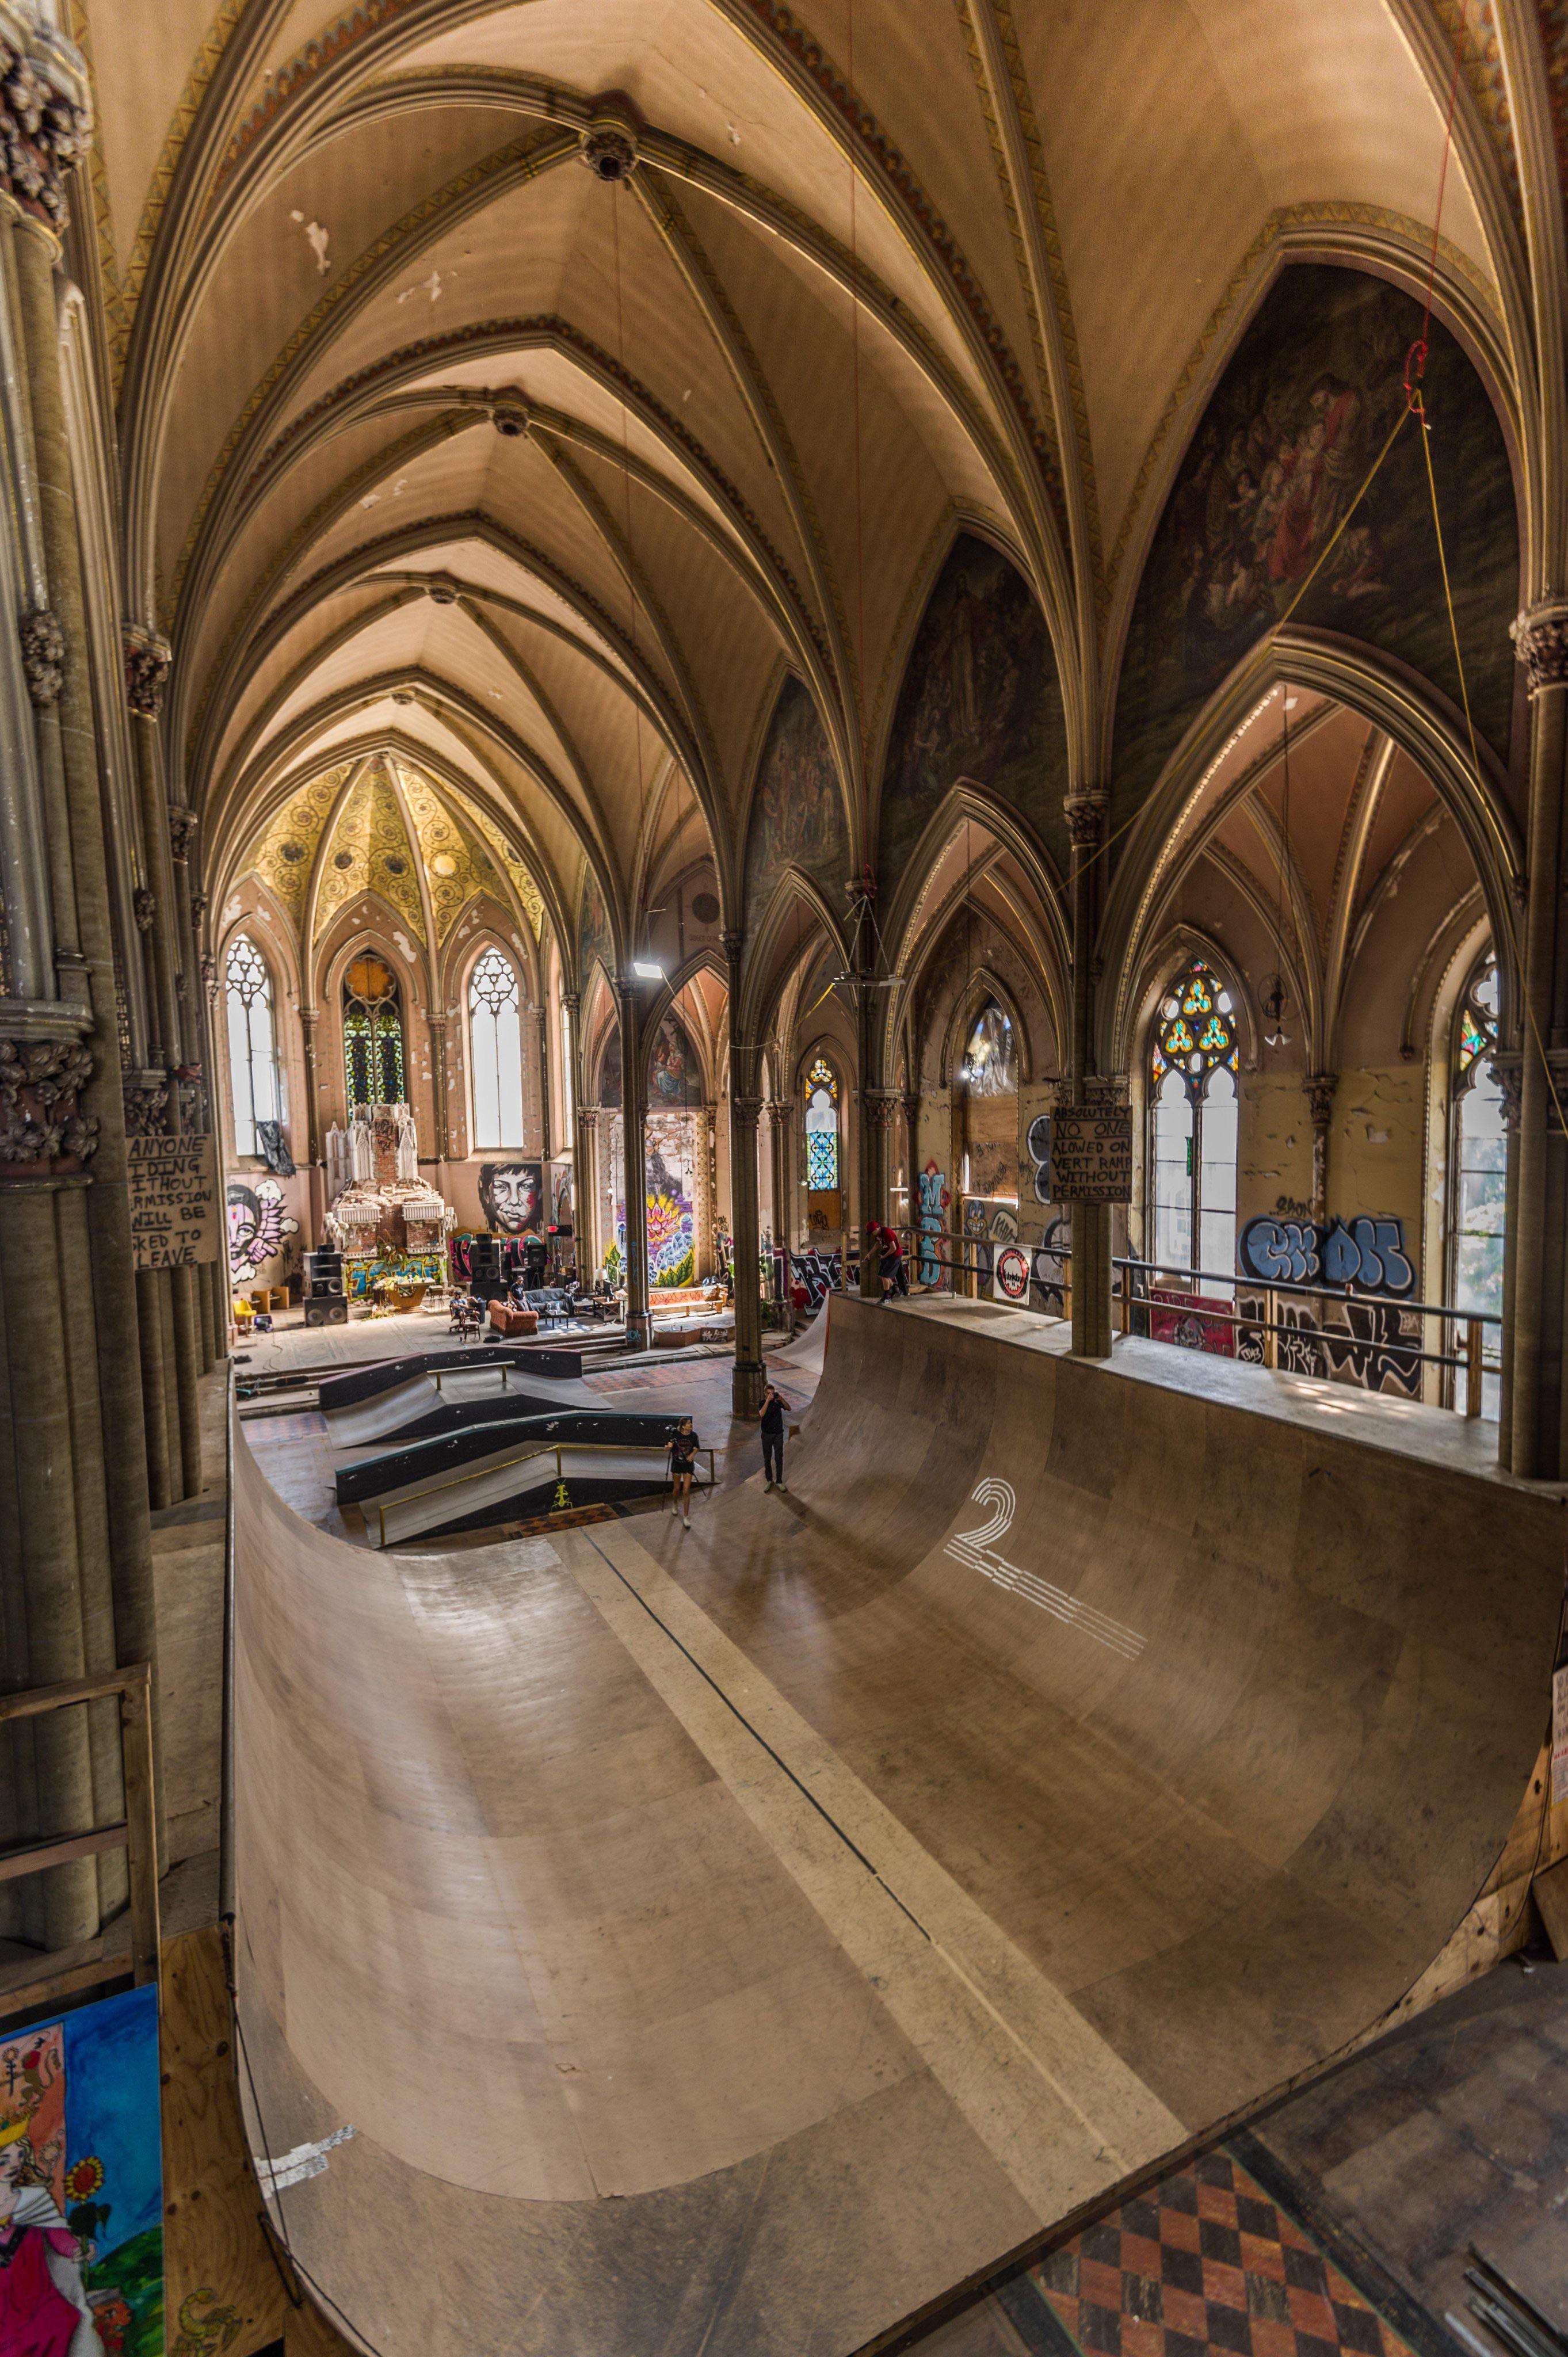 image showing St. Liborius Church, purchased by skaters and turned into a dream park